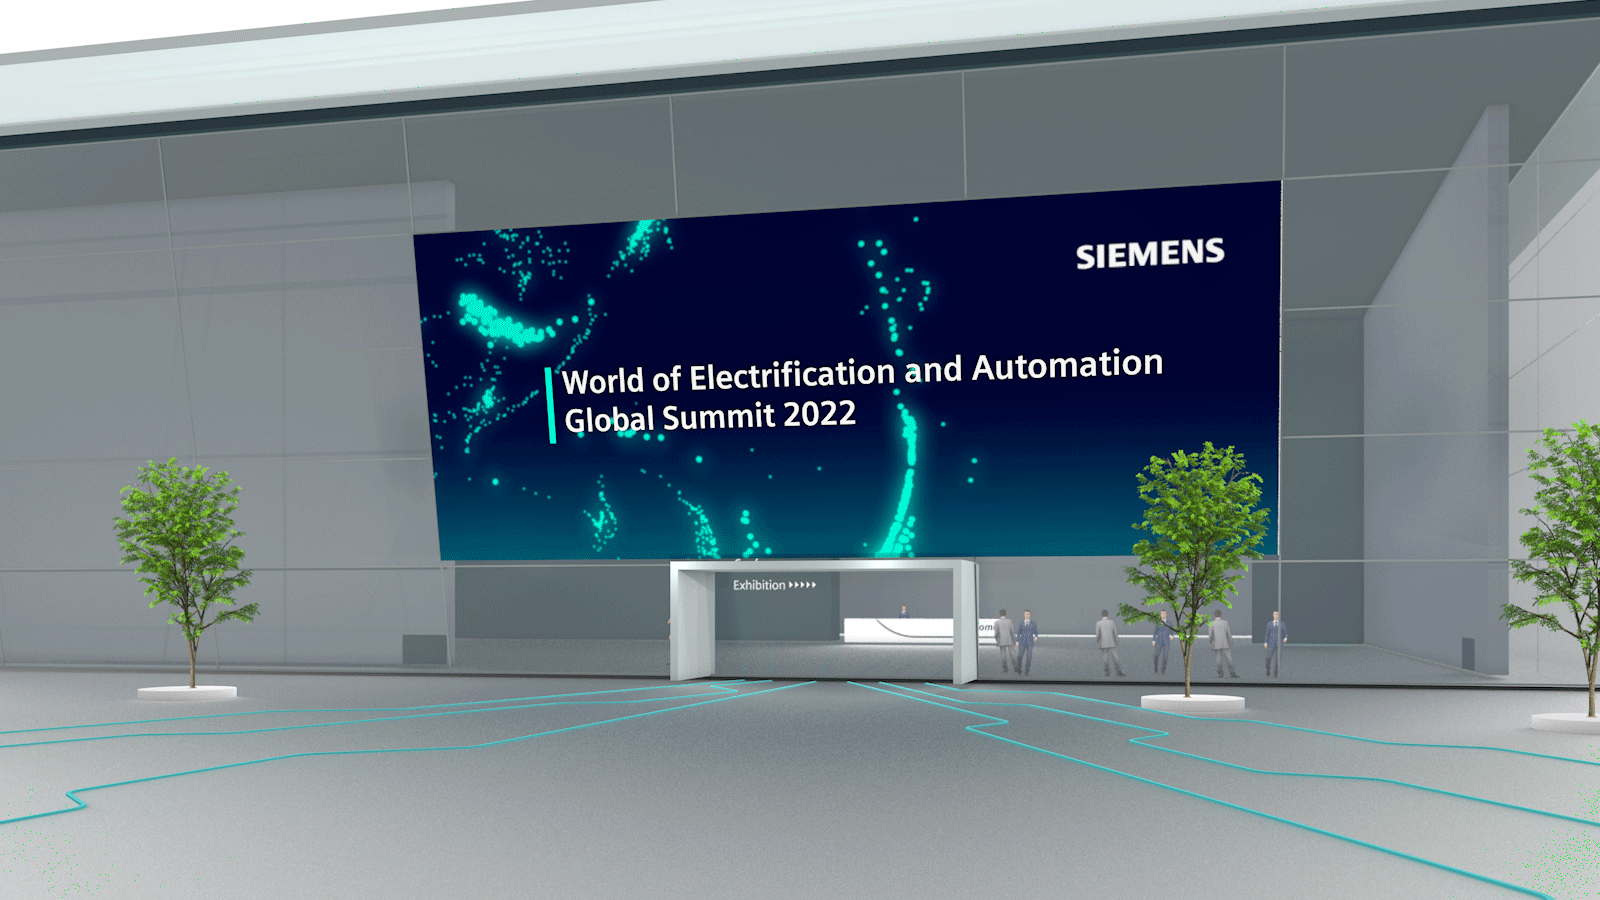 World of Electrification and Automation – Global Summit 2022